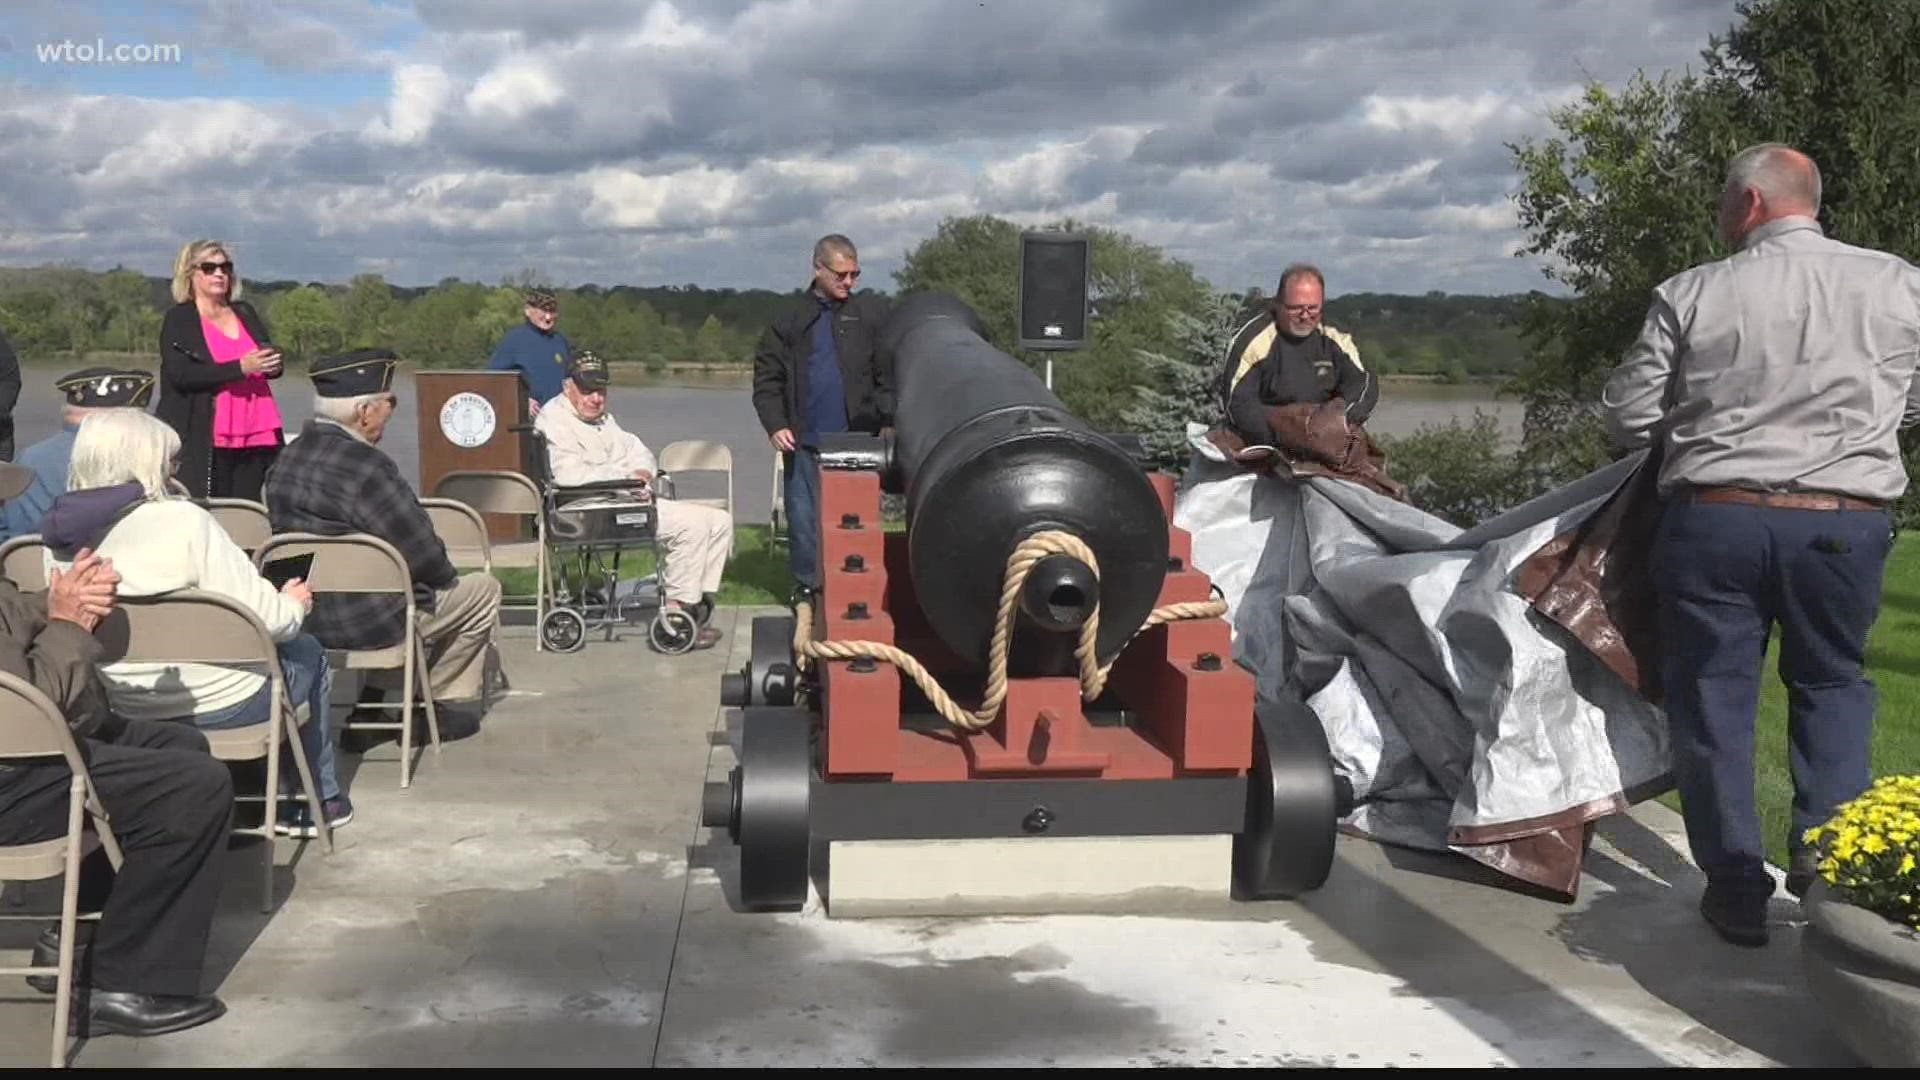 After a few months away, the USS Constitution replica cannons were unveiled with a new look at the city's rededication ceremony Saturday